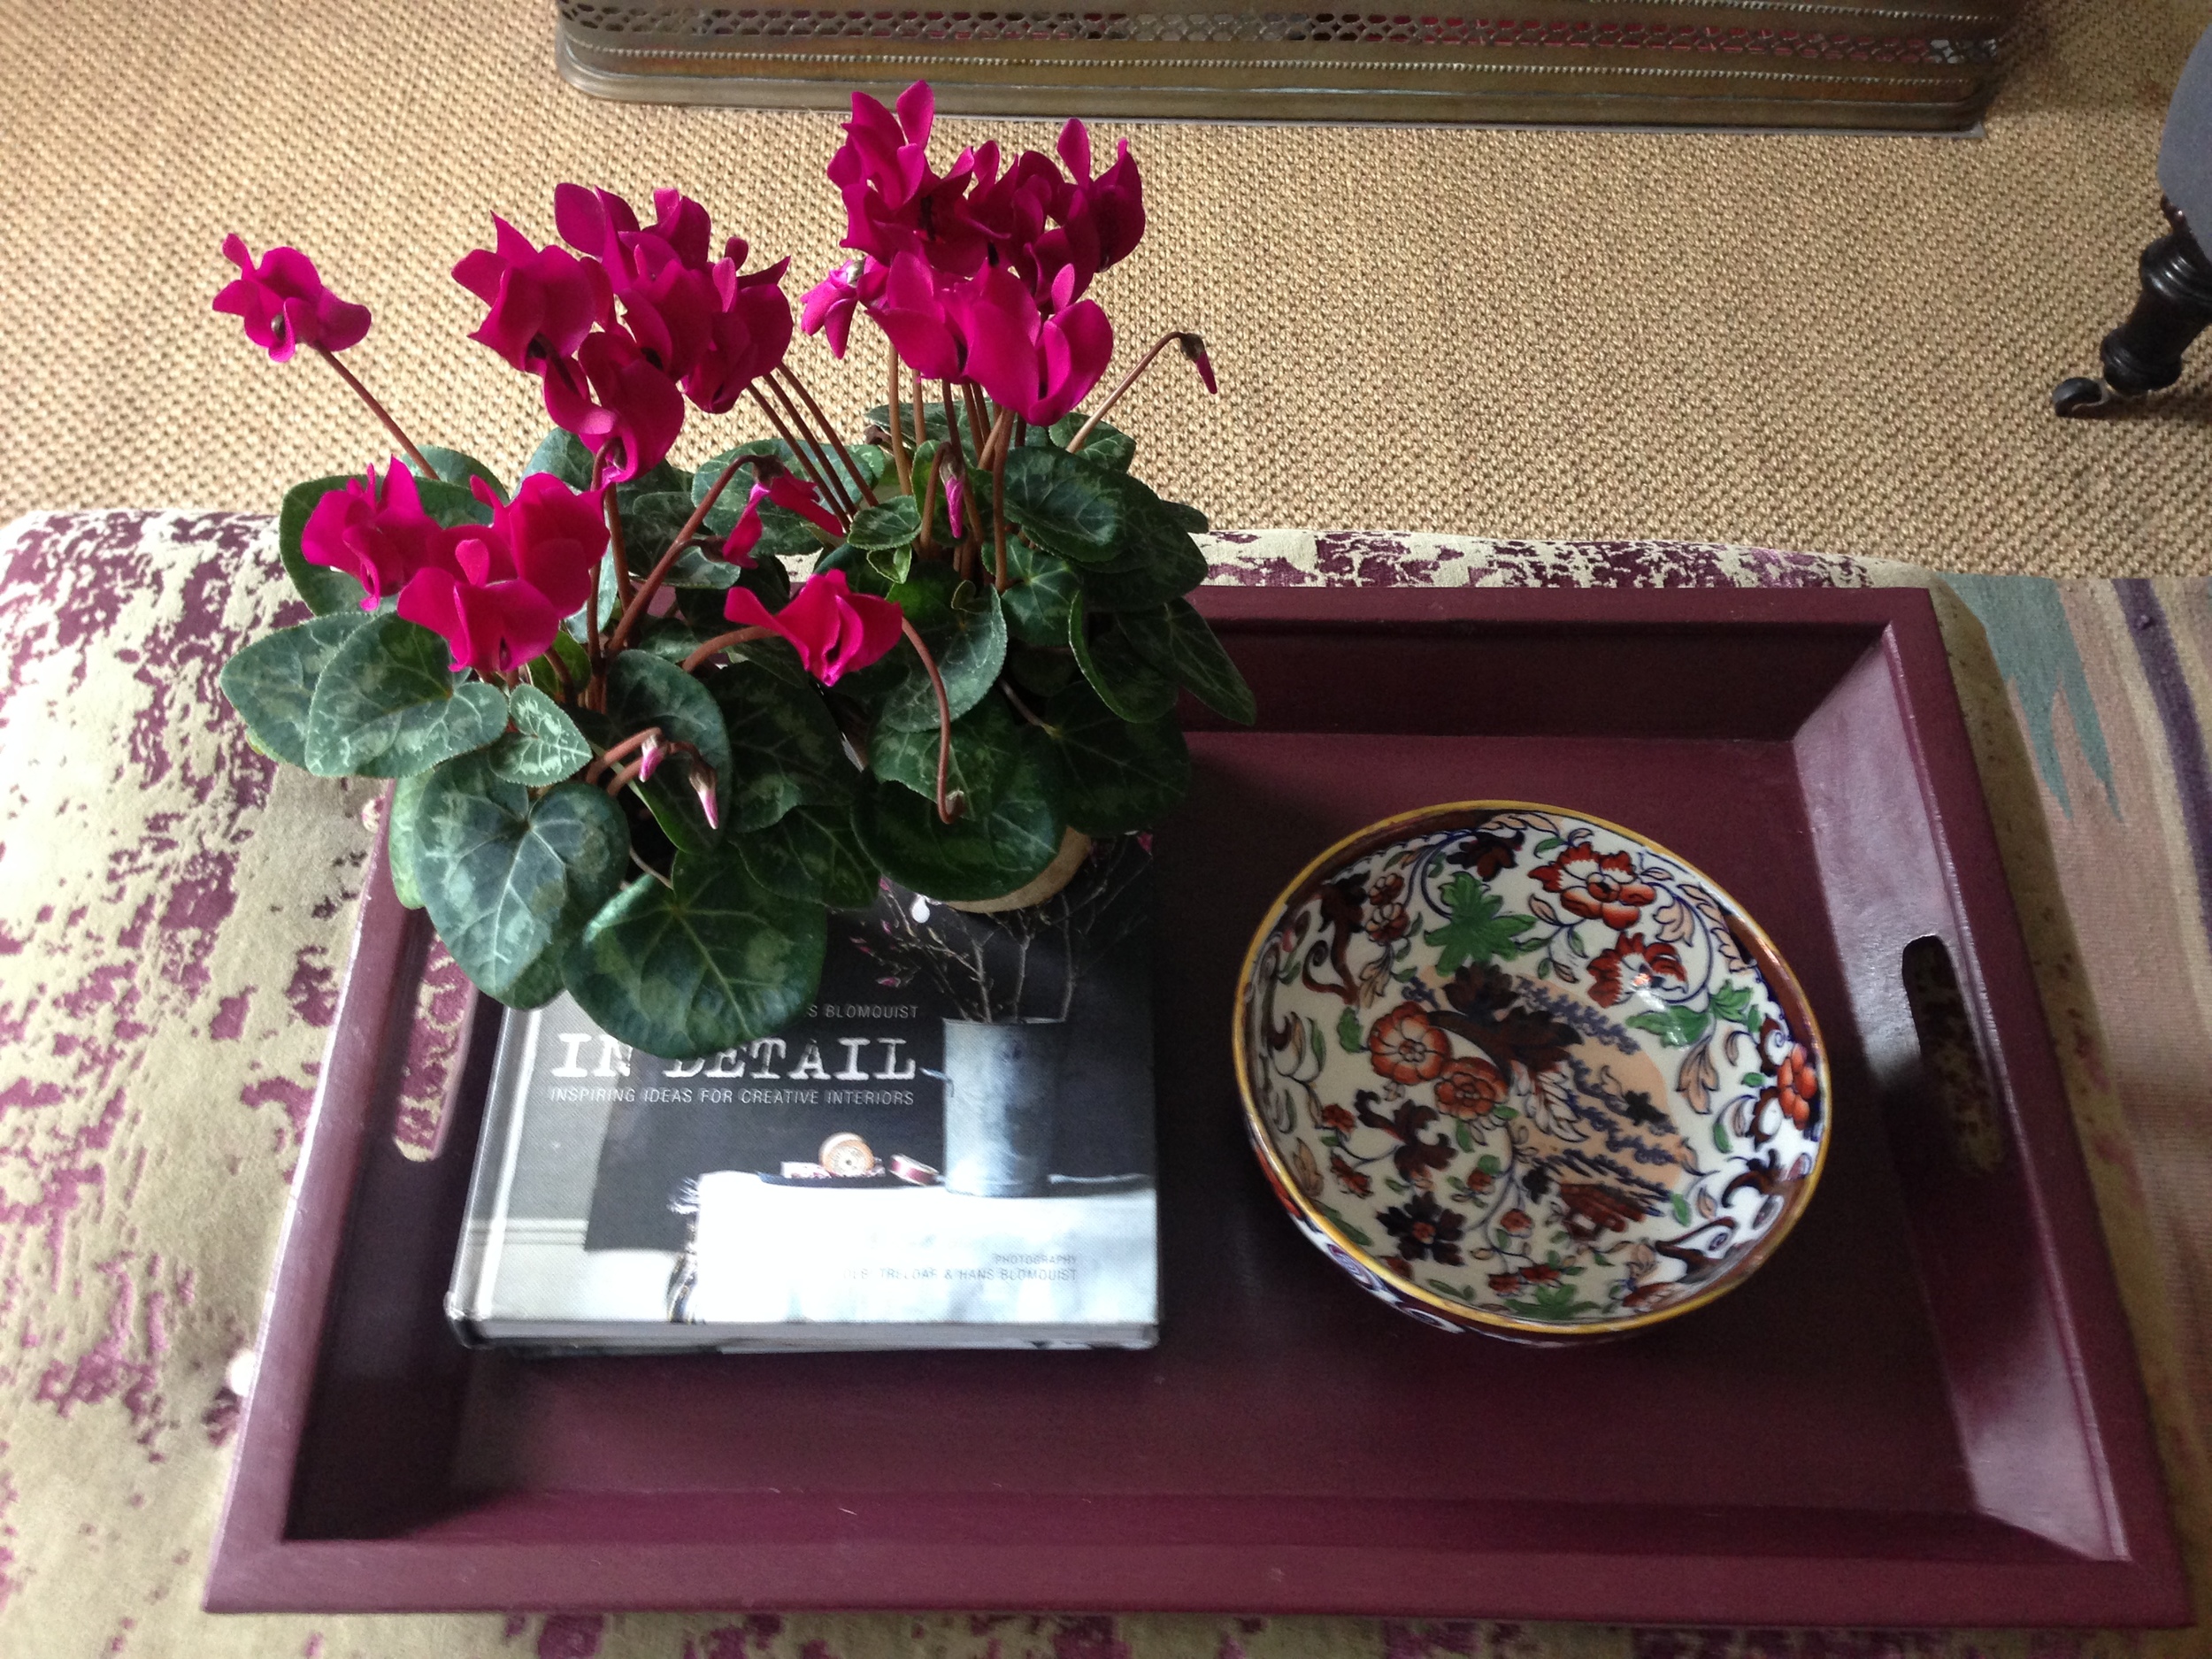  The little vintage bowl I purchased has found its place on a tray I recently painted in Farrow &amp; Ball 'Brinjal' 